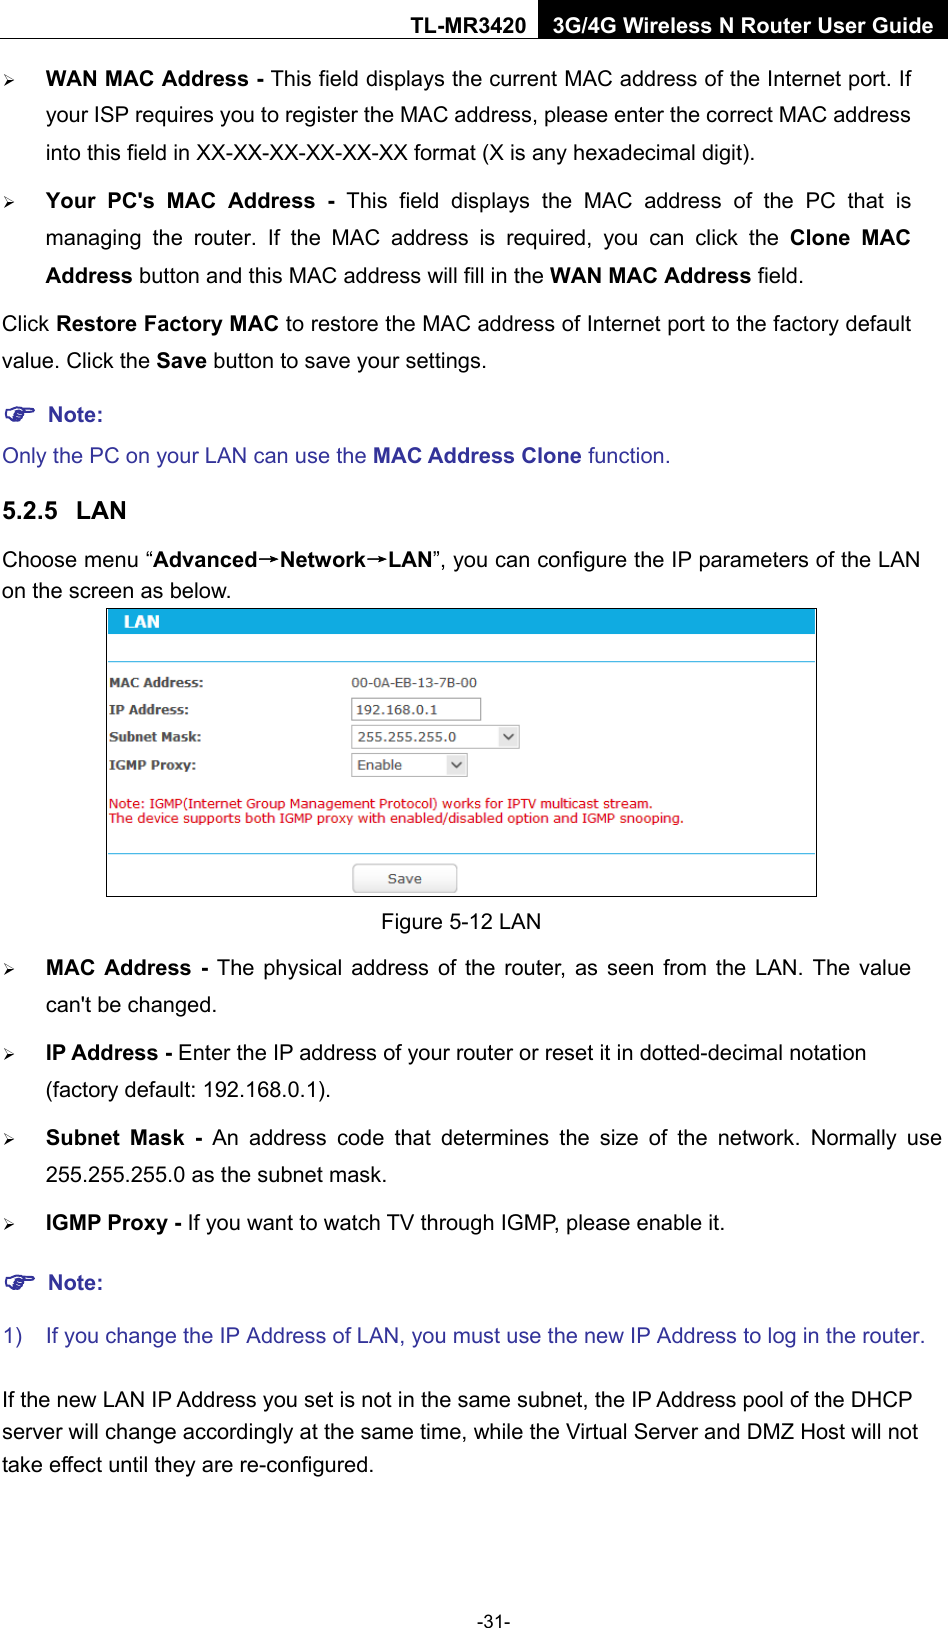    -31- TL-MR3420 3G/4G Wireless N Router User Guide  WAN MAC Address - This field displays the current MAC address of the Internet port. If your ISP requires you to register the MAC address, please enter the correct MAC address into this field in XX-XX-XX-XX-XX-XX format (X is any hexadecimal digit).    Your PC&apos;s MAC Address - This field displays the MAC address of the PC that is managing the router. If the MAC address is required, you can click the Clone MAC Address button and this MAC address will fill in the WAN MAC Address field. Click Restore Factory MAC to restore the MAC address of Internet port to the factory default value. Click the Save button to save your settings.  Note:   Only the PC on your LAN can use the MAC Address Clone function. 5.2.5 LAN Choose menu “Advanced→Network→LAN”, you can configure the IP parameters of the LAN on the screen as below.  Figure 5-12 LAN  MAC Address - The physical address of the router, as seen from the LAN. The value can&apos;t be changed.  IP Address - Enter the IP address of your router or reset it in dotted-decimal notation (factory default: 192.168.0.1).  Subnet Mask - An address code that determines the size of the network. Normally use 255.255.255.0 as the subnet mask.    IGMP Proxy - If you want to watch TV through IGMP, please enable it.  Note: 1) If you change the IP Address of LAN, you must use the new IP Address to log in the router.   If the new LAN IP Address you set is not in the same subnet, the IP Address pool of the DHCP server will change accordingly at the same time, while the Virtual Server and DMZ Host will not take effect until they are re-configured. 